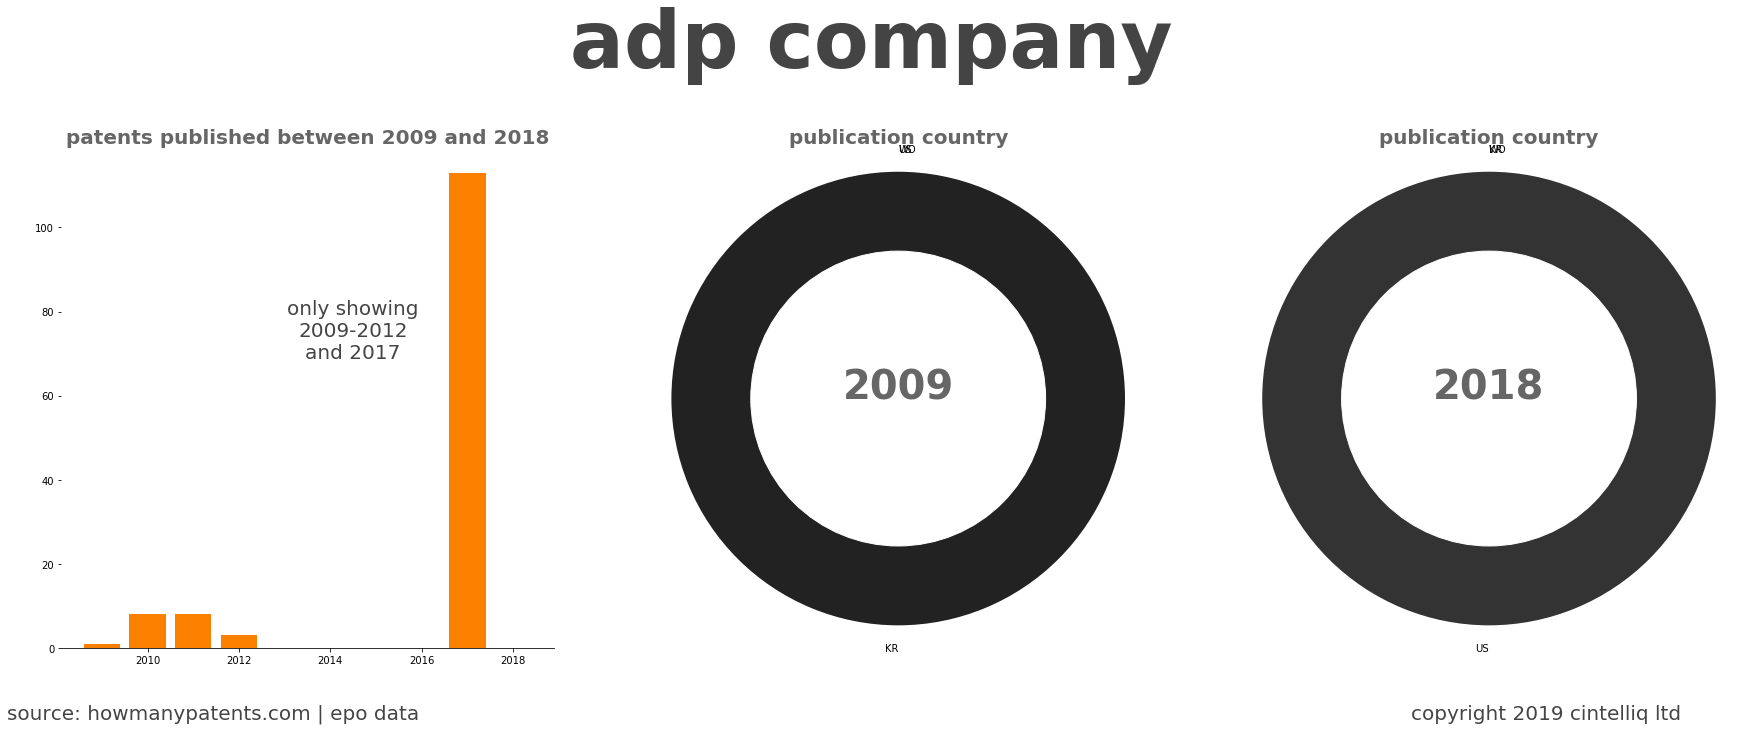 summary of patents for Adp Company